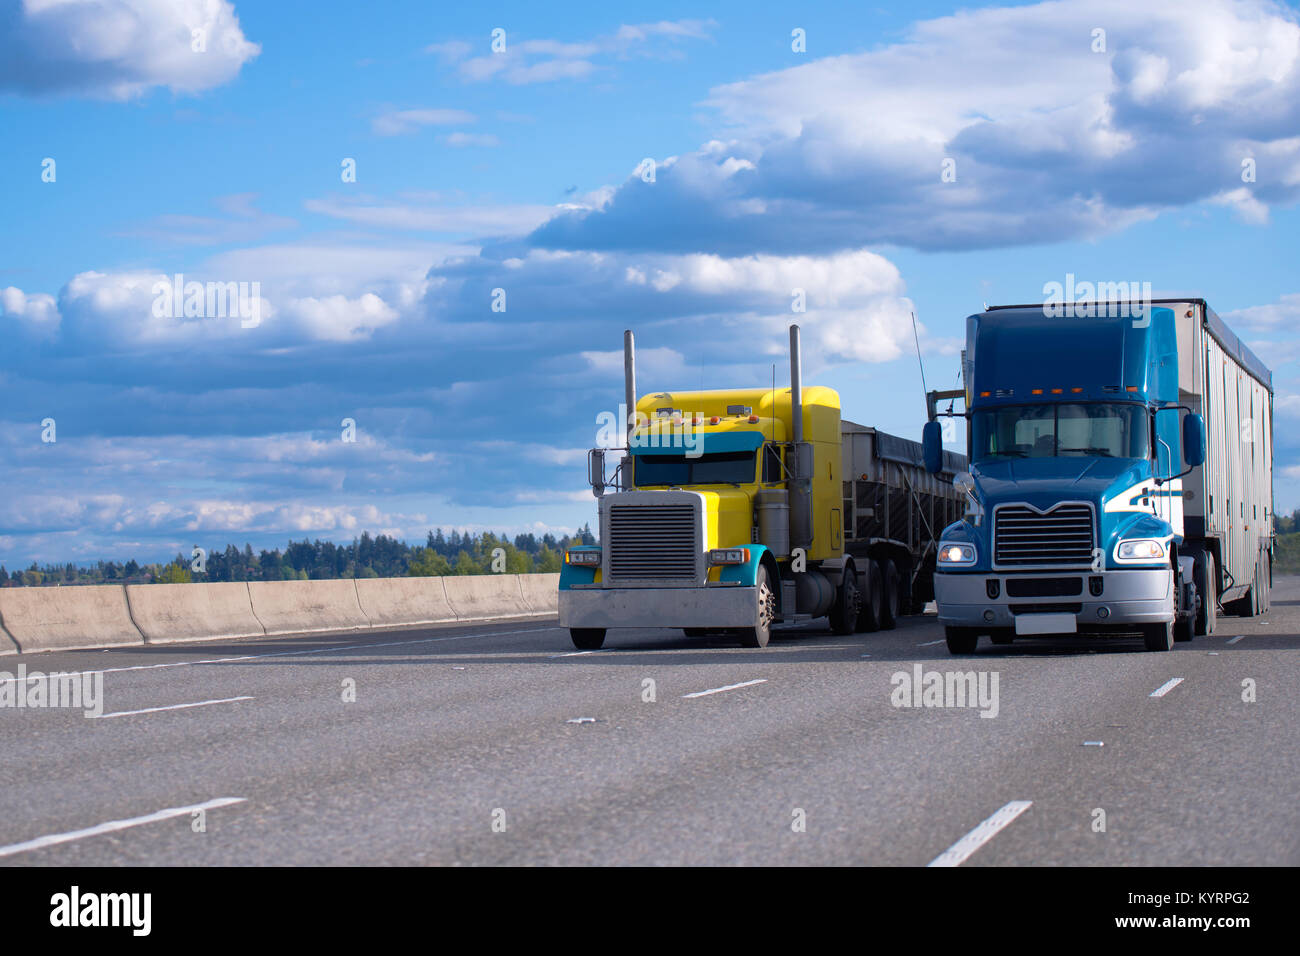 Two semi trucks of various models and manufacturers, a yellow classic American semi truck with a bulk trailer and a blue modern American semi truck Stock Photo